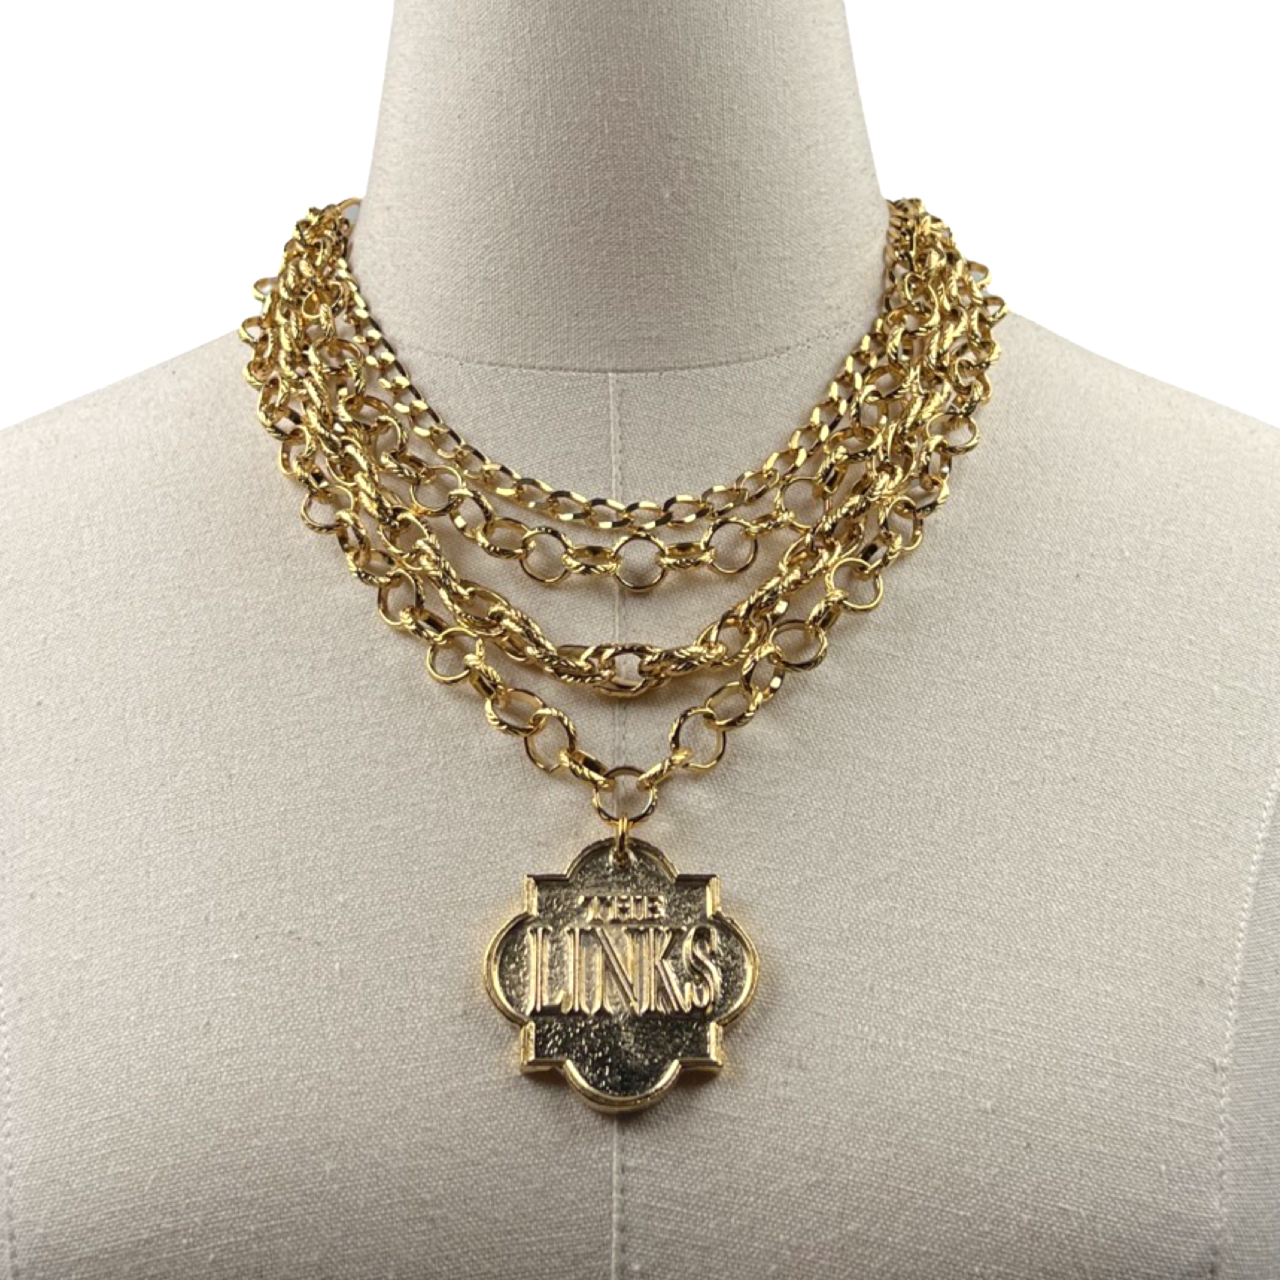 Links Classic Beat Necklace LINKS Necklaces Cerese D, Inc. Shield Gold 